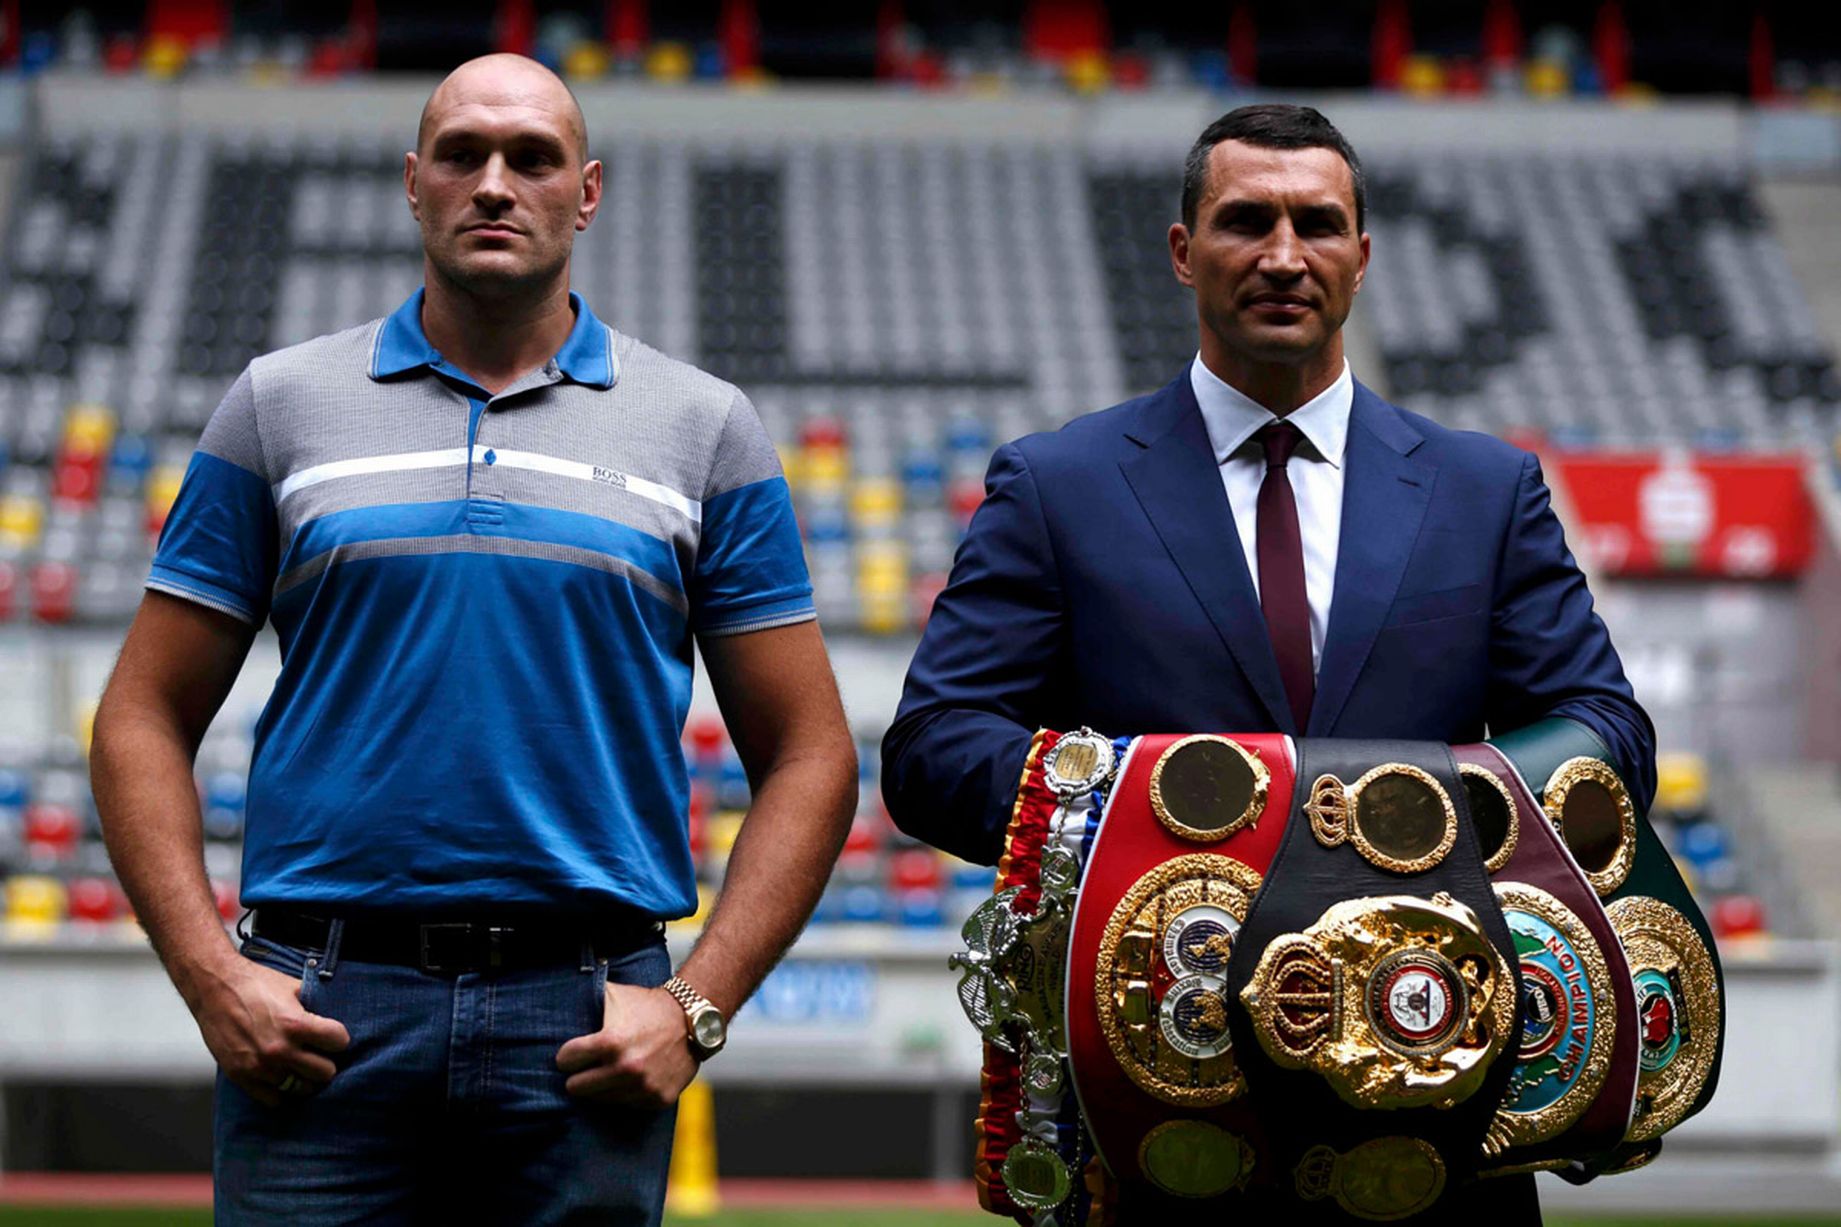 Fury vs. Klitschko 2 is Coming… But Who Cares?